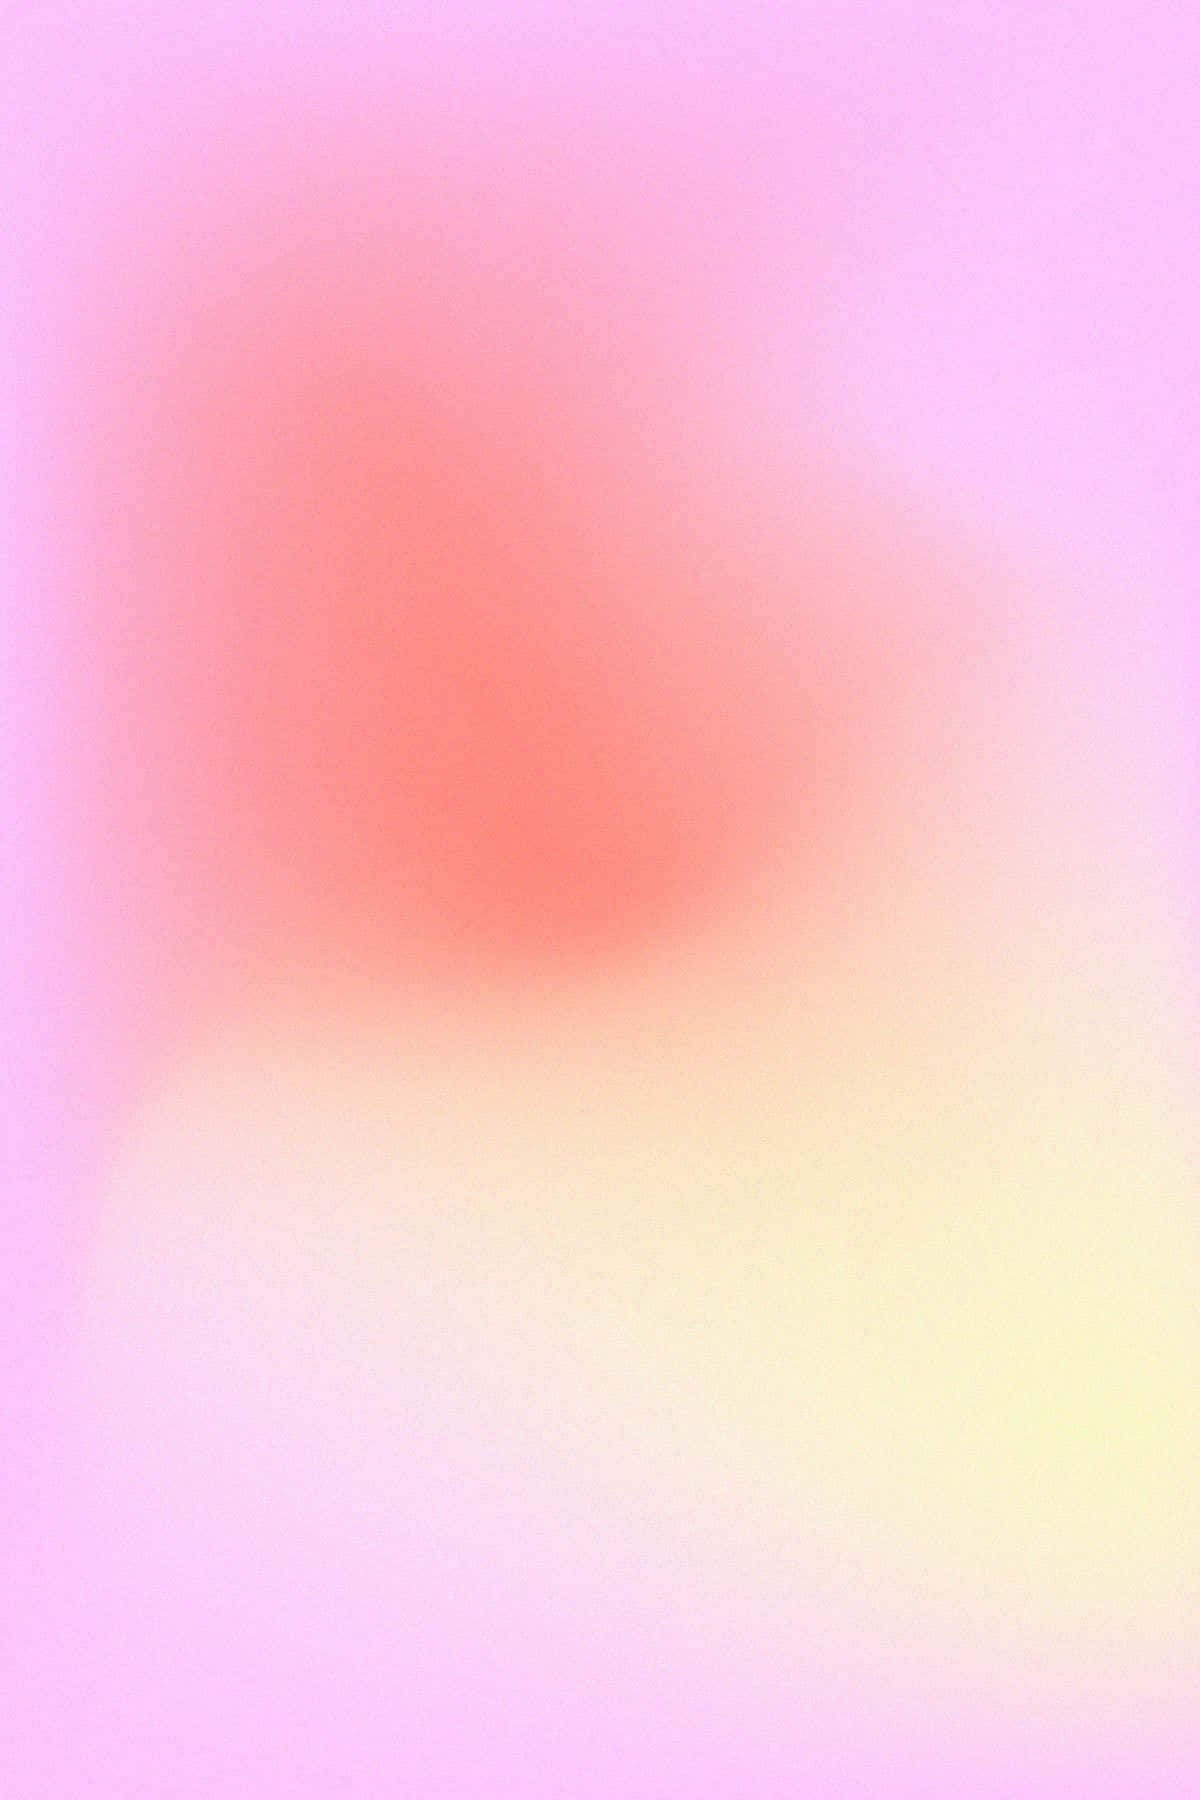 Pastel Gradient Background Pink Red And Yellow